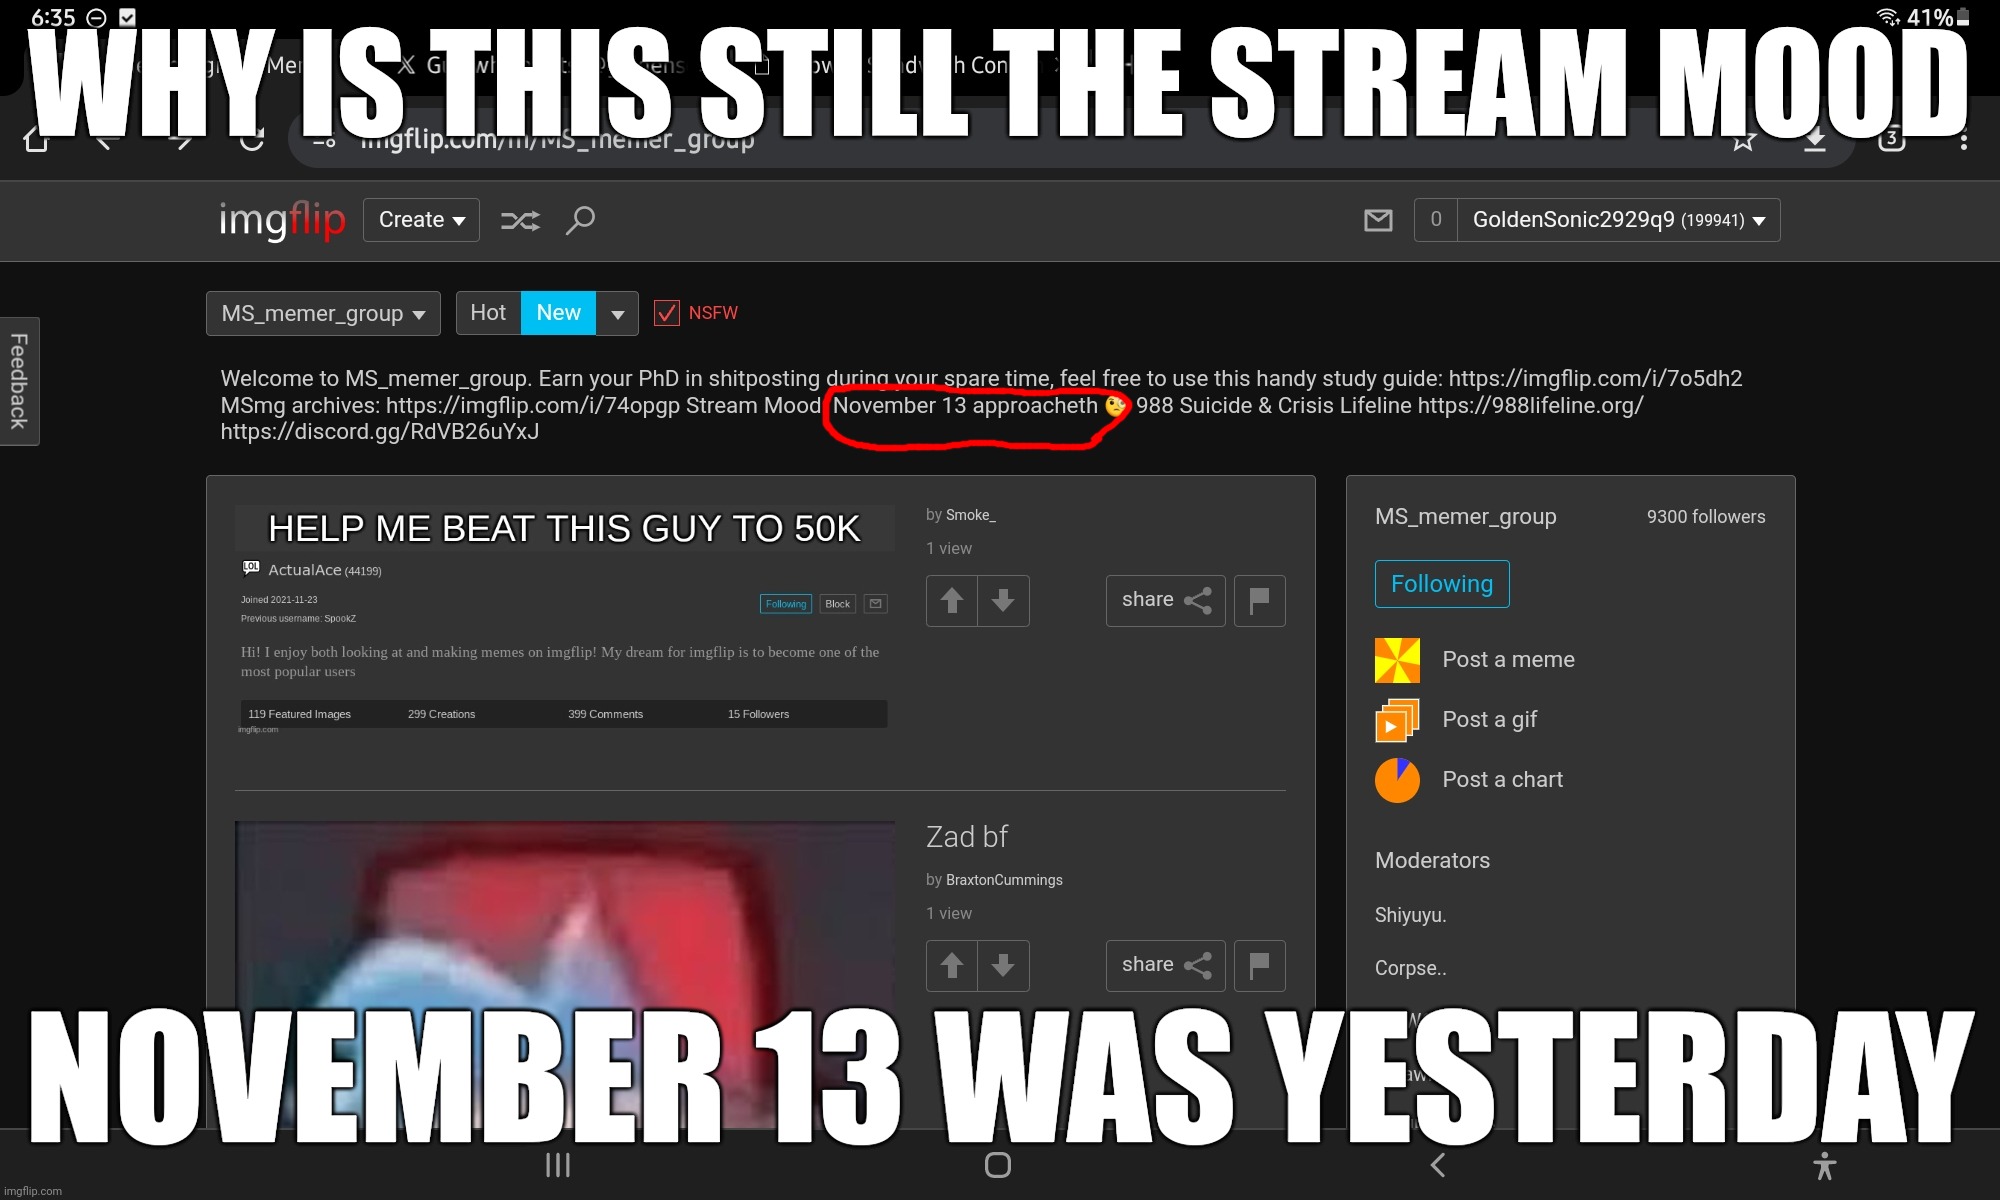 WHY IS THIS STILL THE STREAM MOOD; NOVEMBER 13 WAS YESTERDAY | made w/ Imgflip meme maker